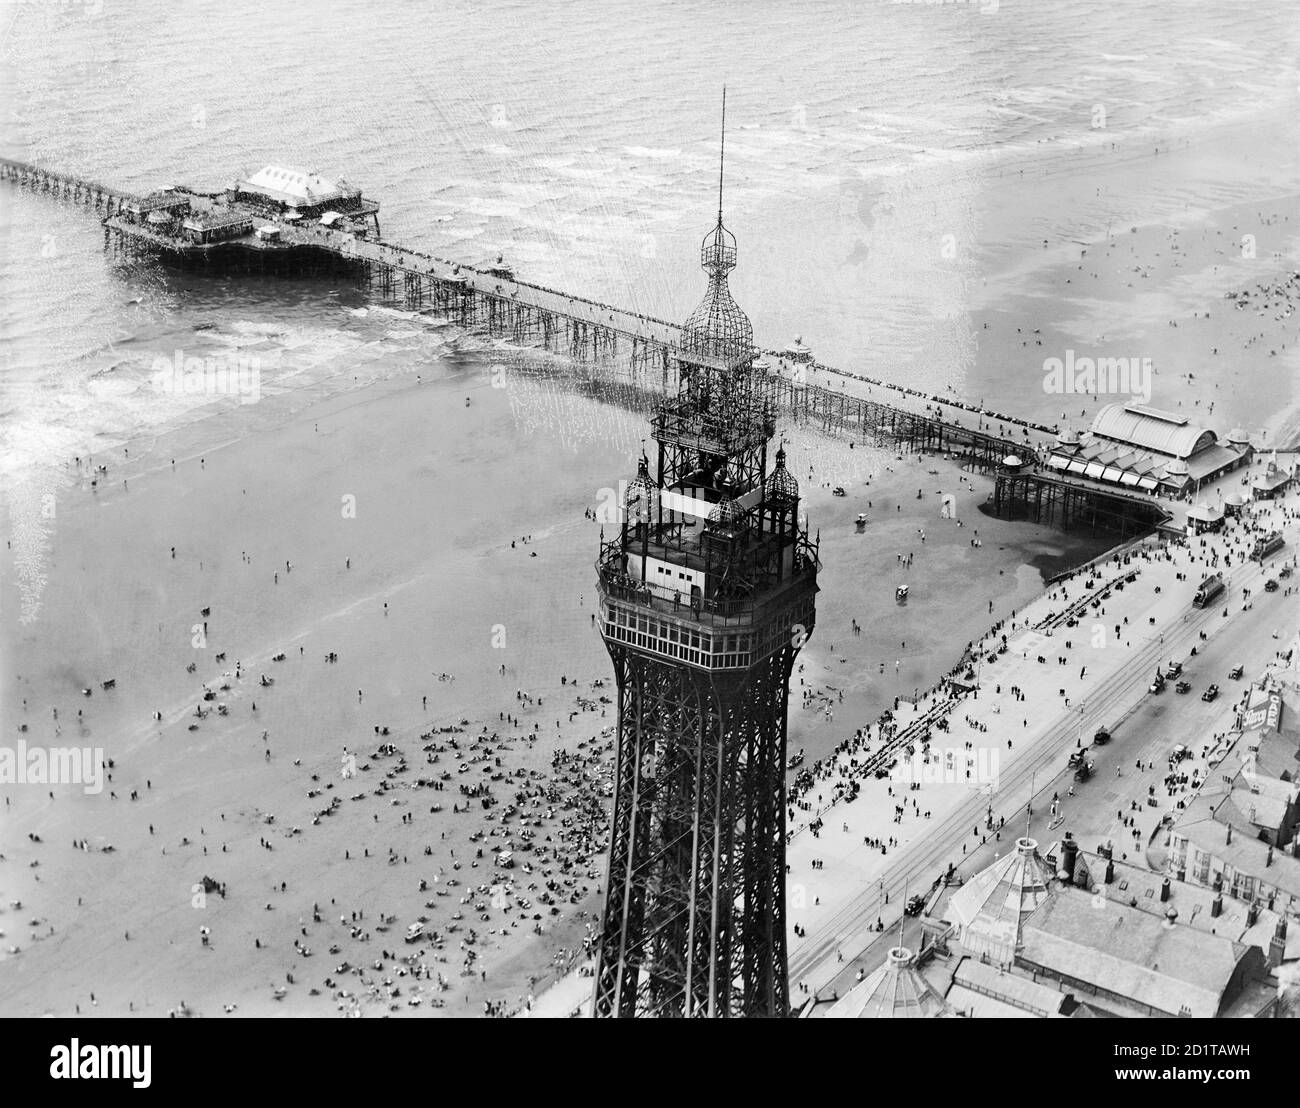 BLACKPOOL, Lancashire. Aerial view of Blackpool tower and pier. Photographed in July 1920. Some damage to negative. Aerofilms Collection (see Links). Stock Photo